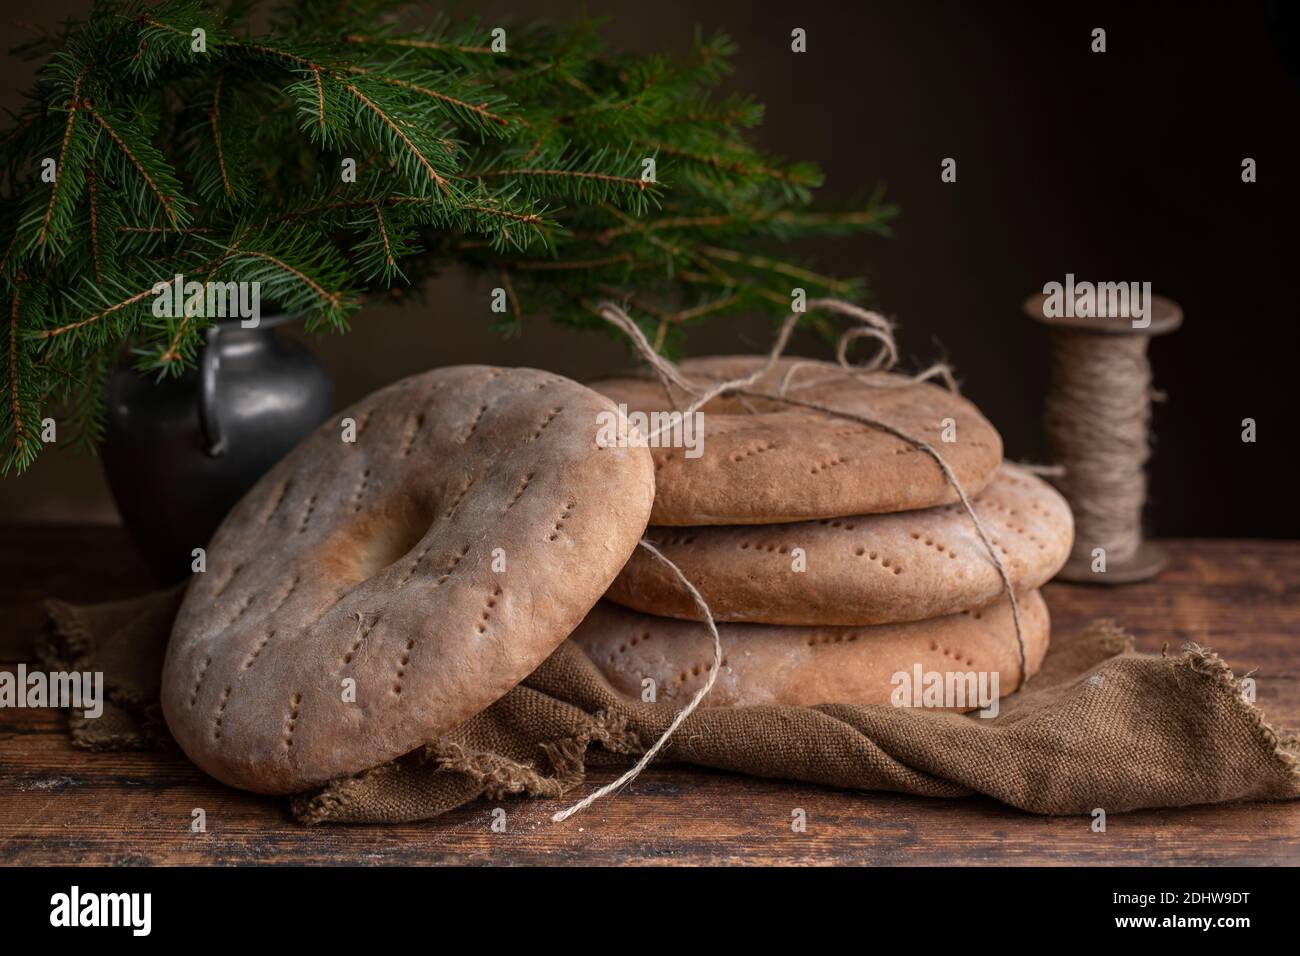 Four round breads with hole in the middle, some of them are tied by a jute cord. Old fashioned rye sieve breads. On a retro brown table, with a vase w Stock Photo